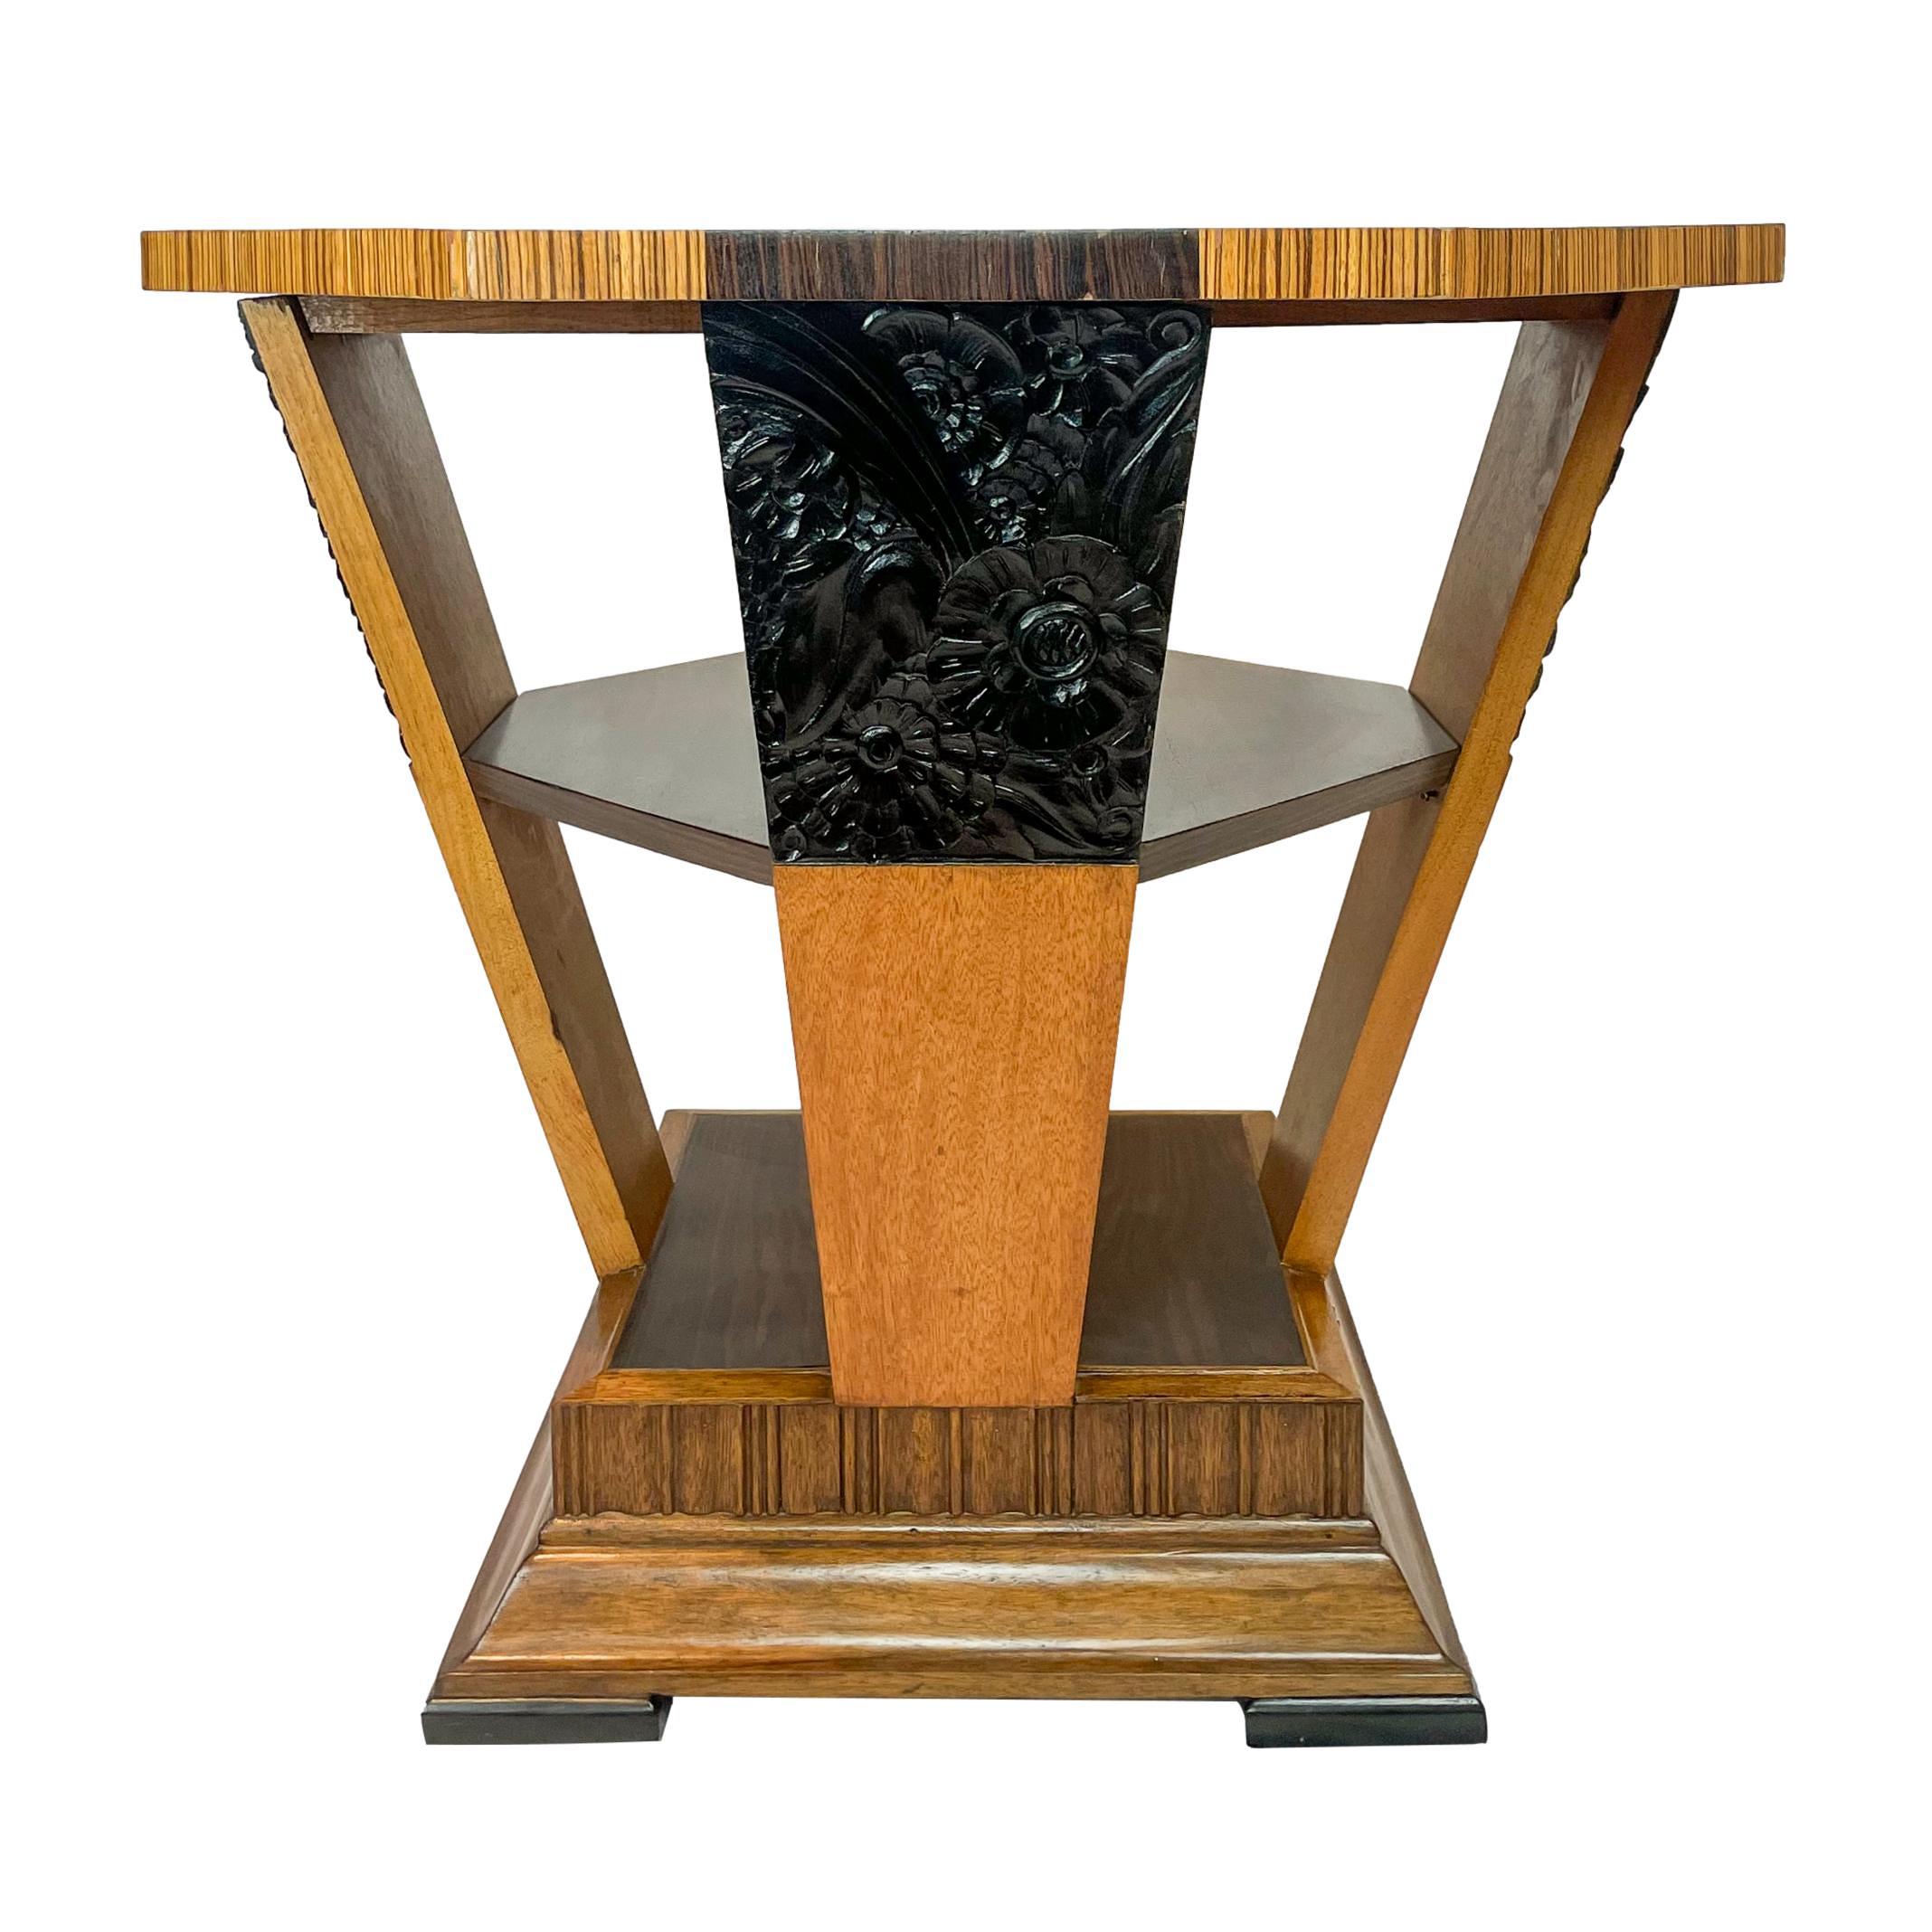 Art Deco center table of Octagonal Form, the top inlaid with alternating Macassar ebony and rosewood sections, supported by four tapering and inward slanting maple panels, the capitals with stylized flowers carved in ebony, with a central inset